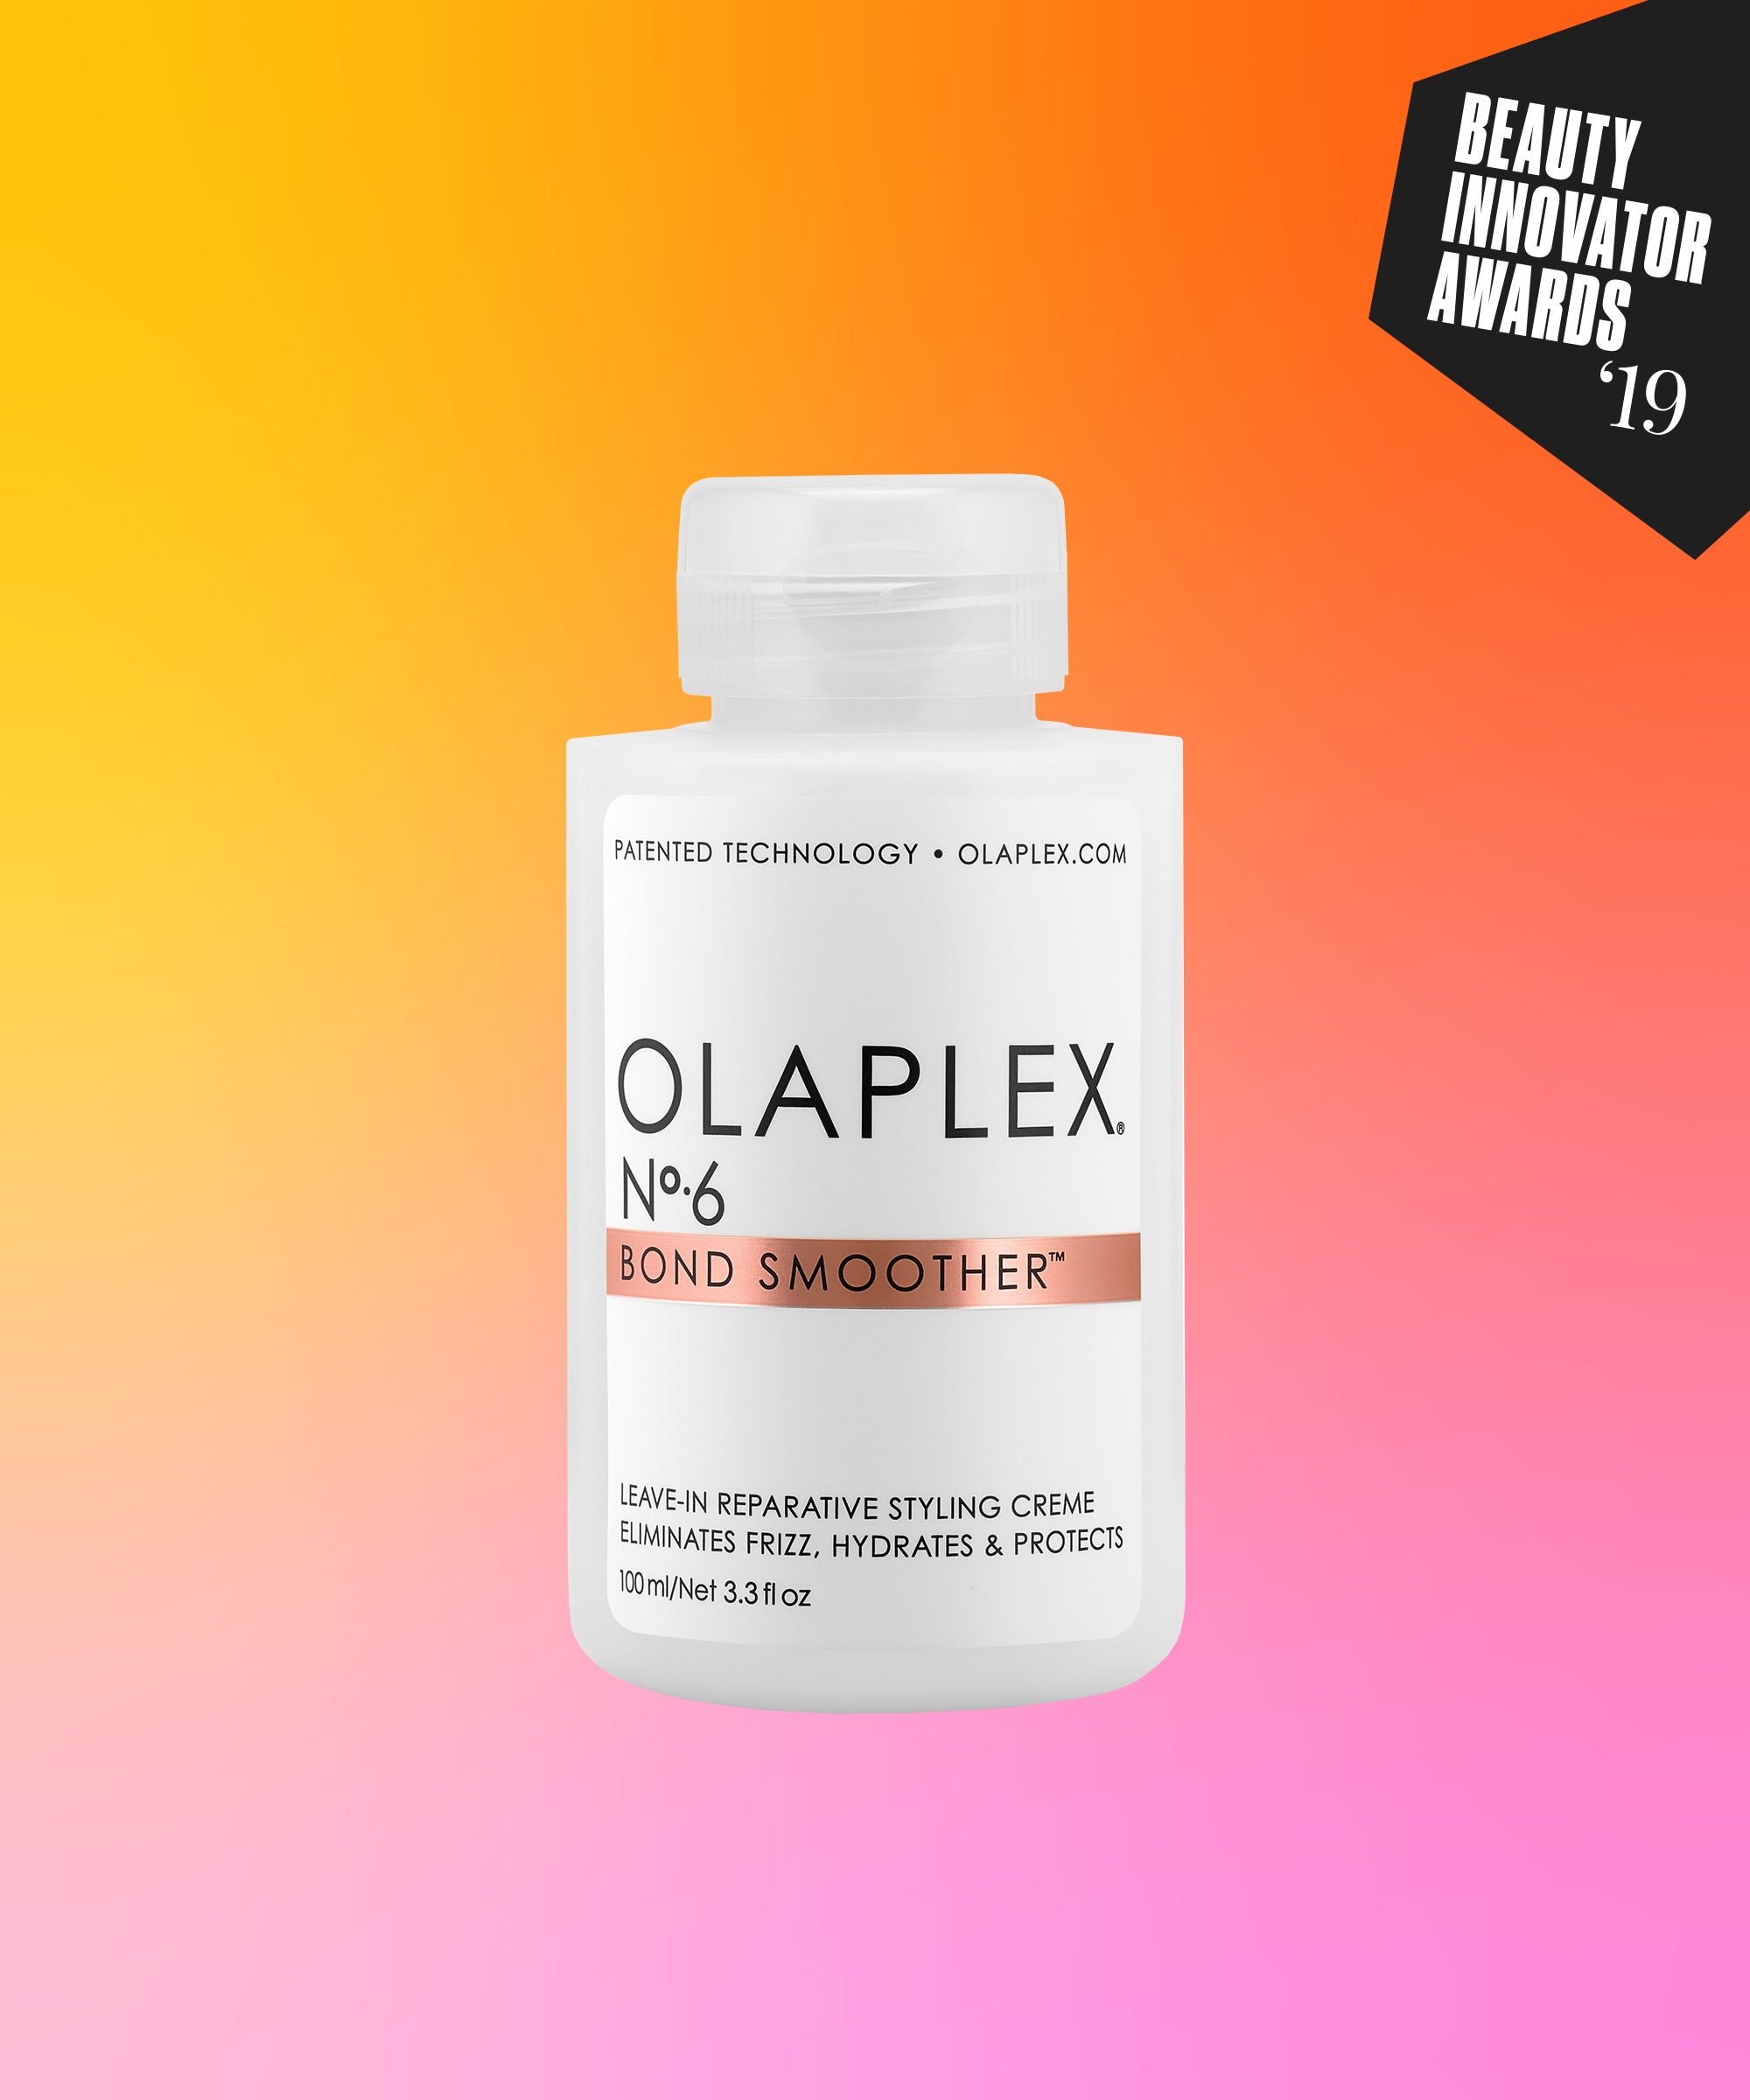 Olaplex No 6 Review: Bond Smoother Leave-In Hair Cream